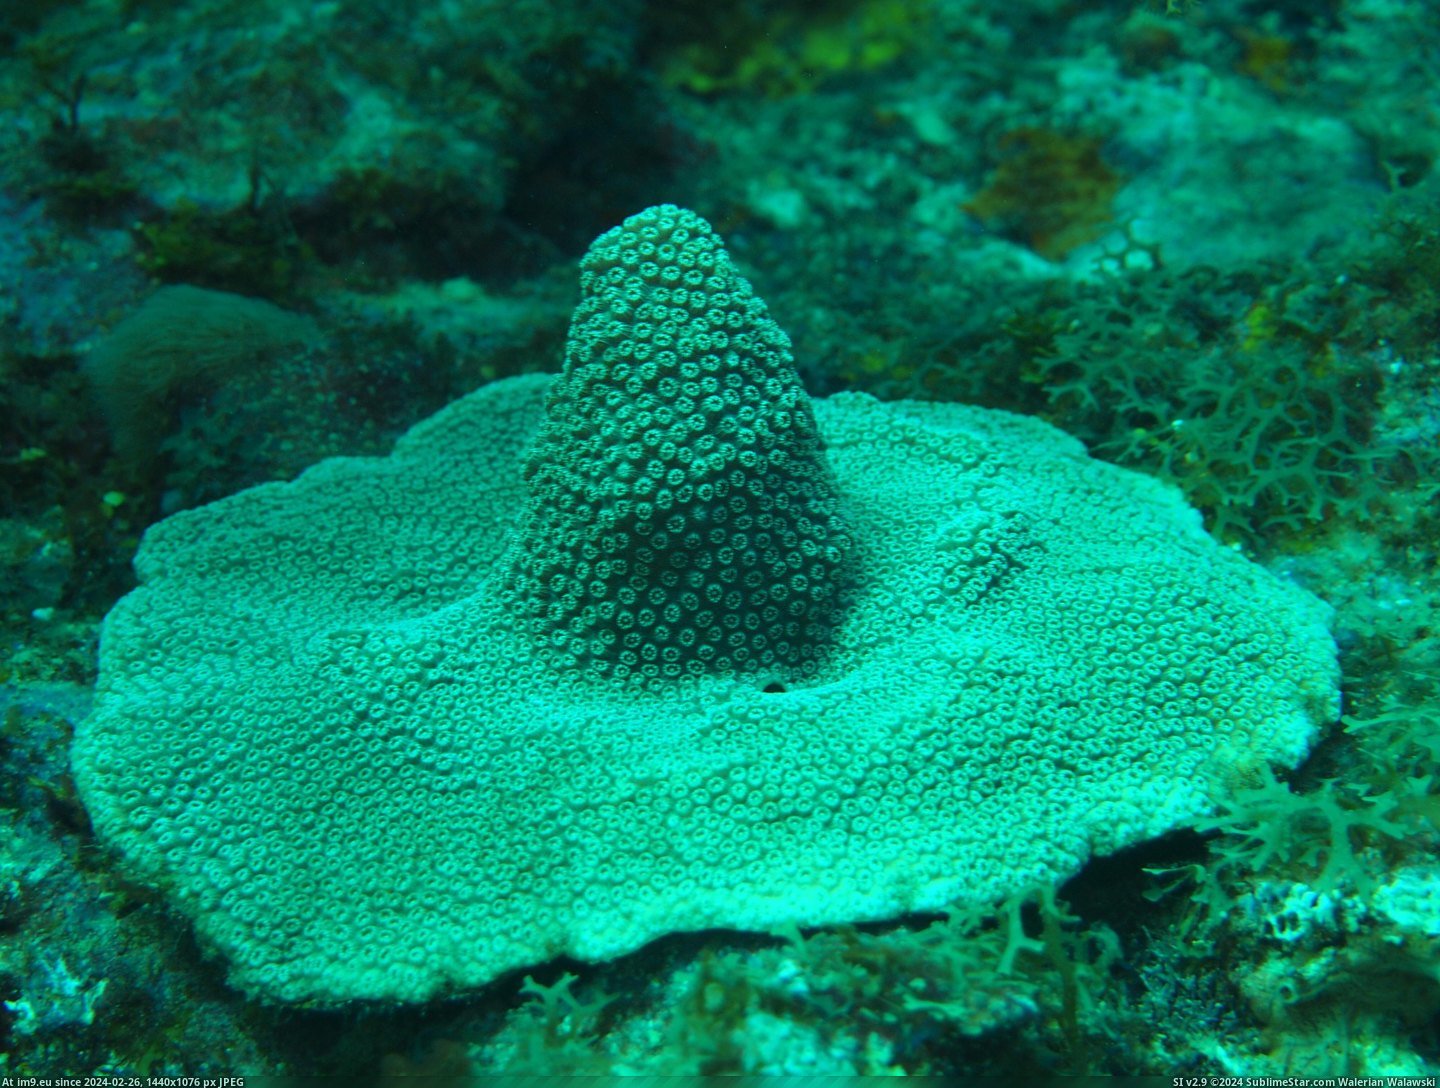 #Star #Saw #Coral #Scuba #Diving #Hat #Witch [Mildlyinteresting] This star coral I saw while SCUBA diving looks like a witch's hat. Pic. (Bild von album My r/MILDLYINTERESTING favs))